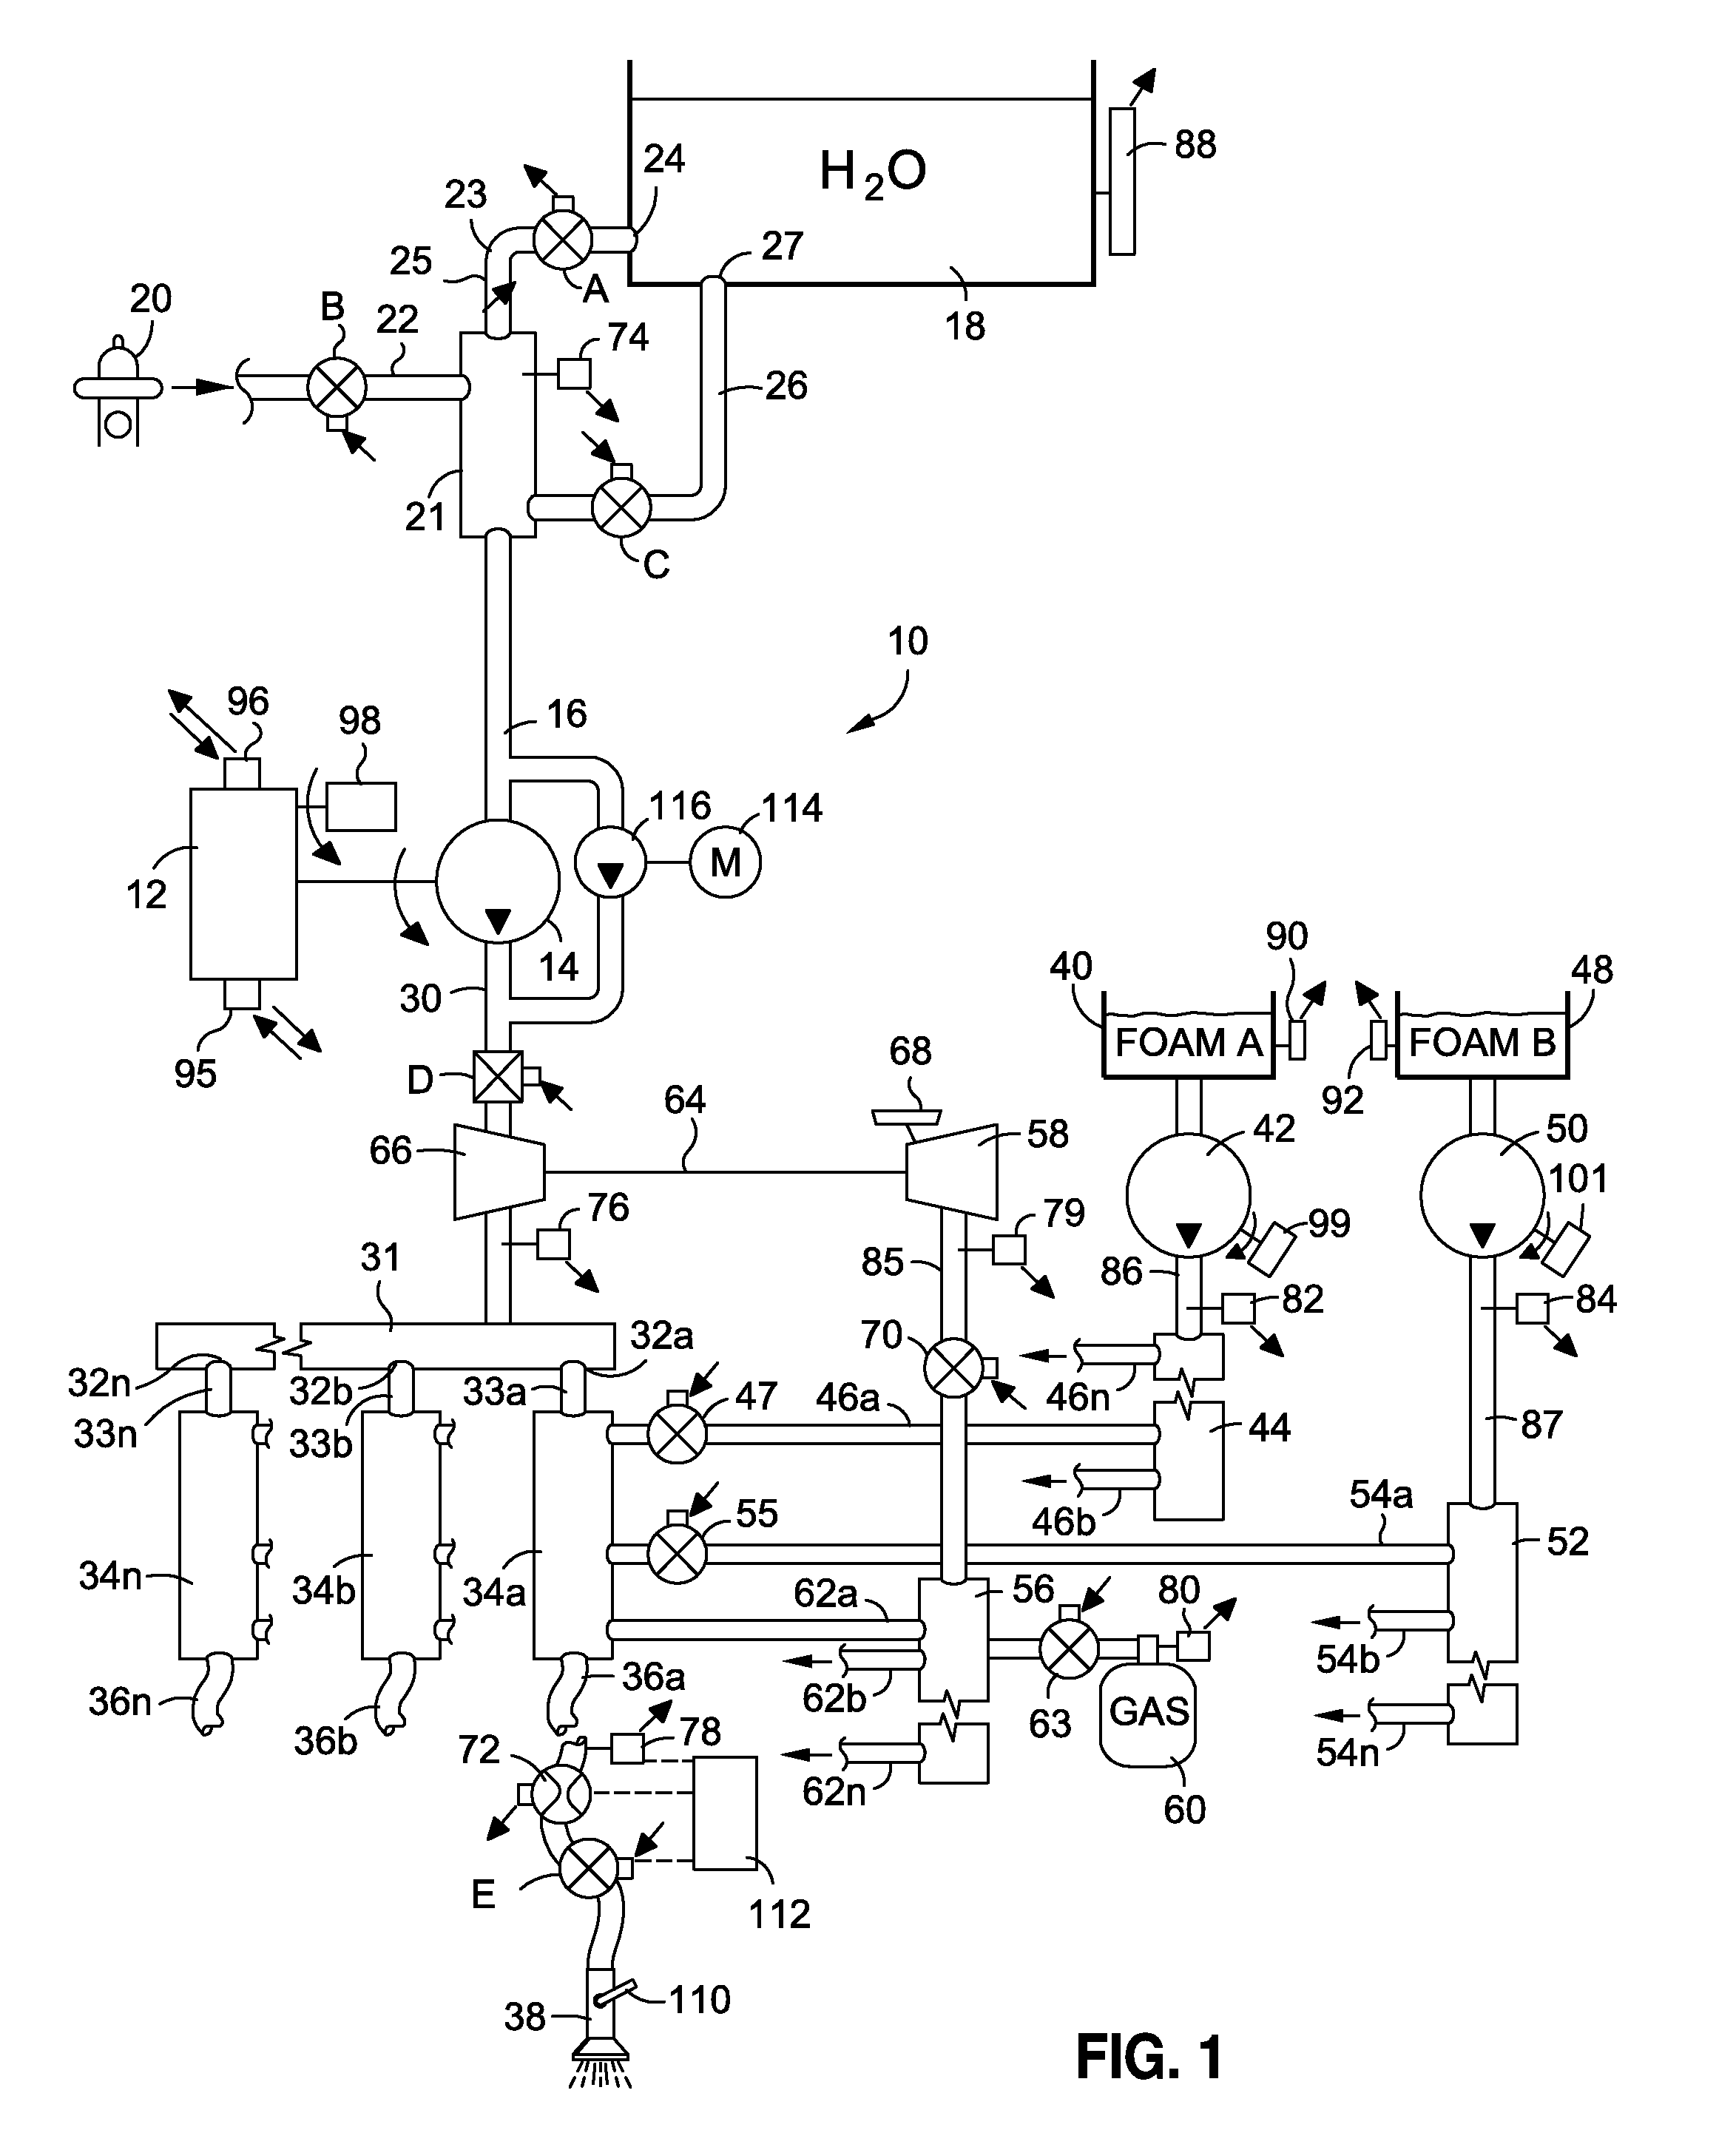 Comprehensive Control System for Mobile Pumping Apparatus